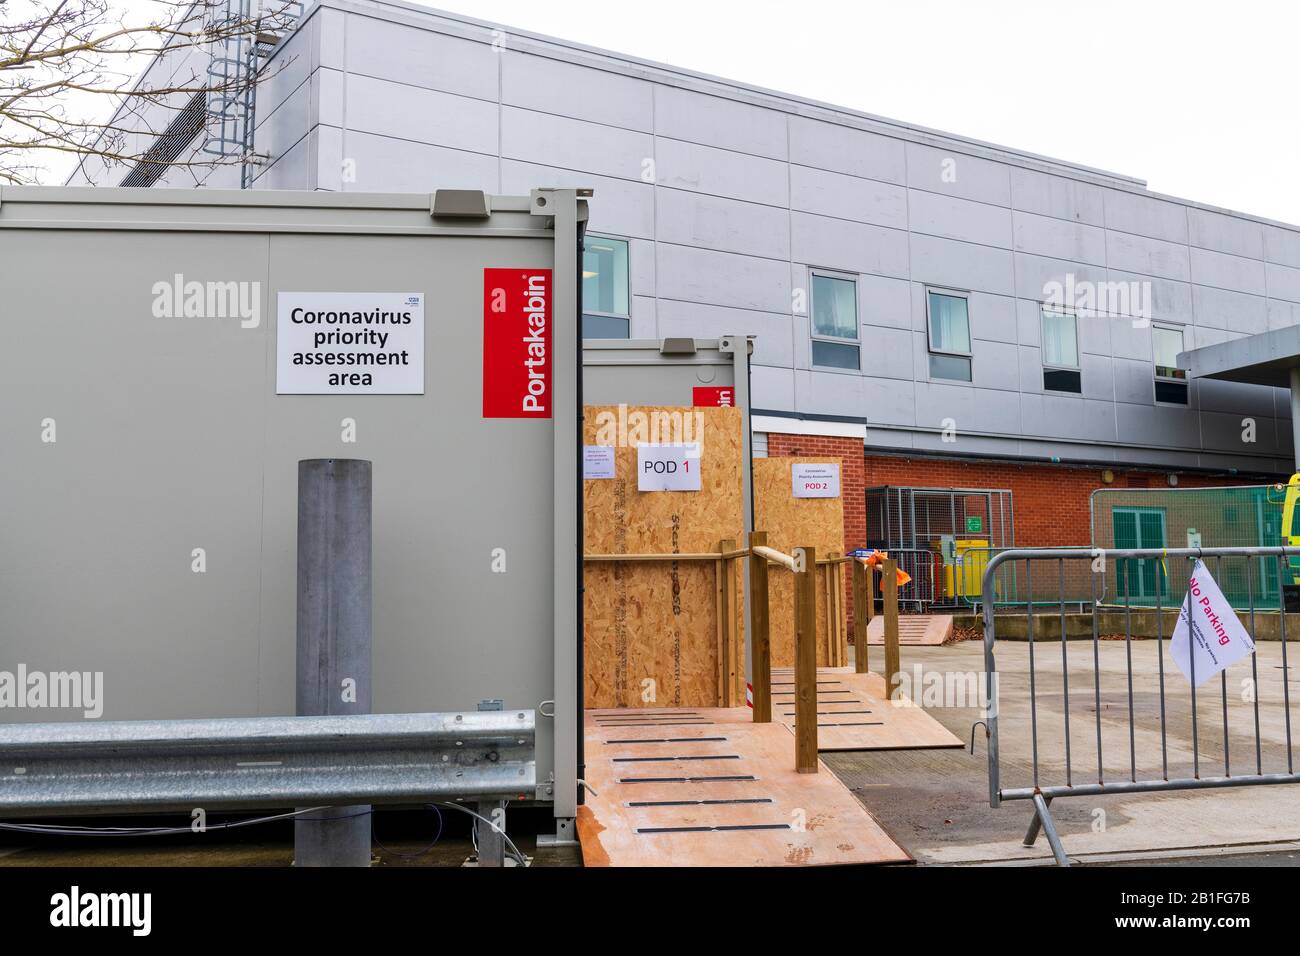 Coronavirus UK pods. Assessment pod at a hospital in England. Isolation pods to assess patients without going in to A&E. Stock Photo